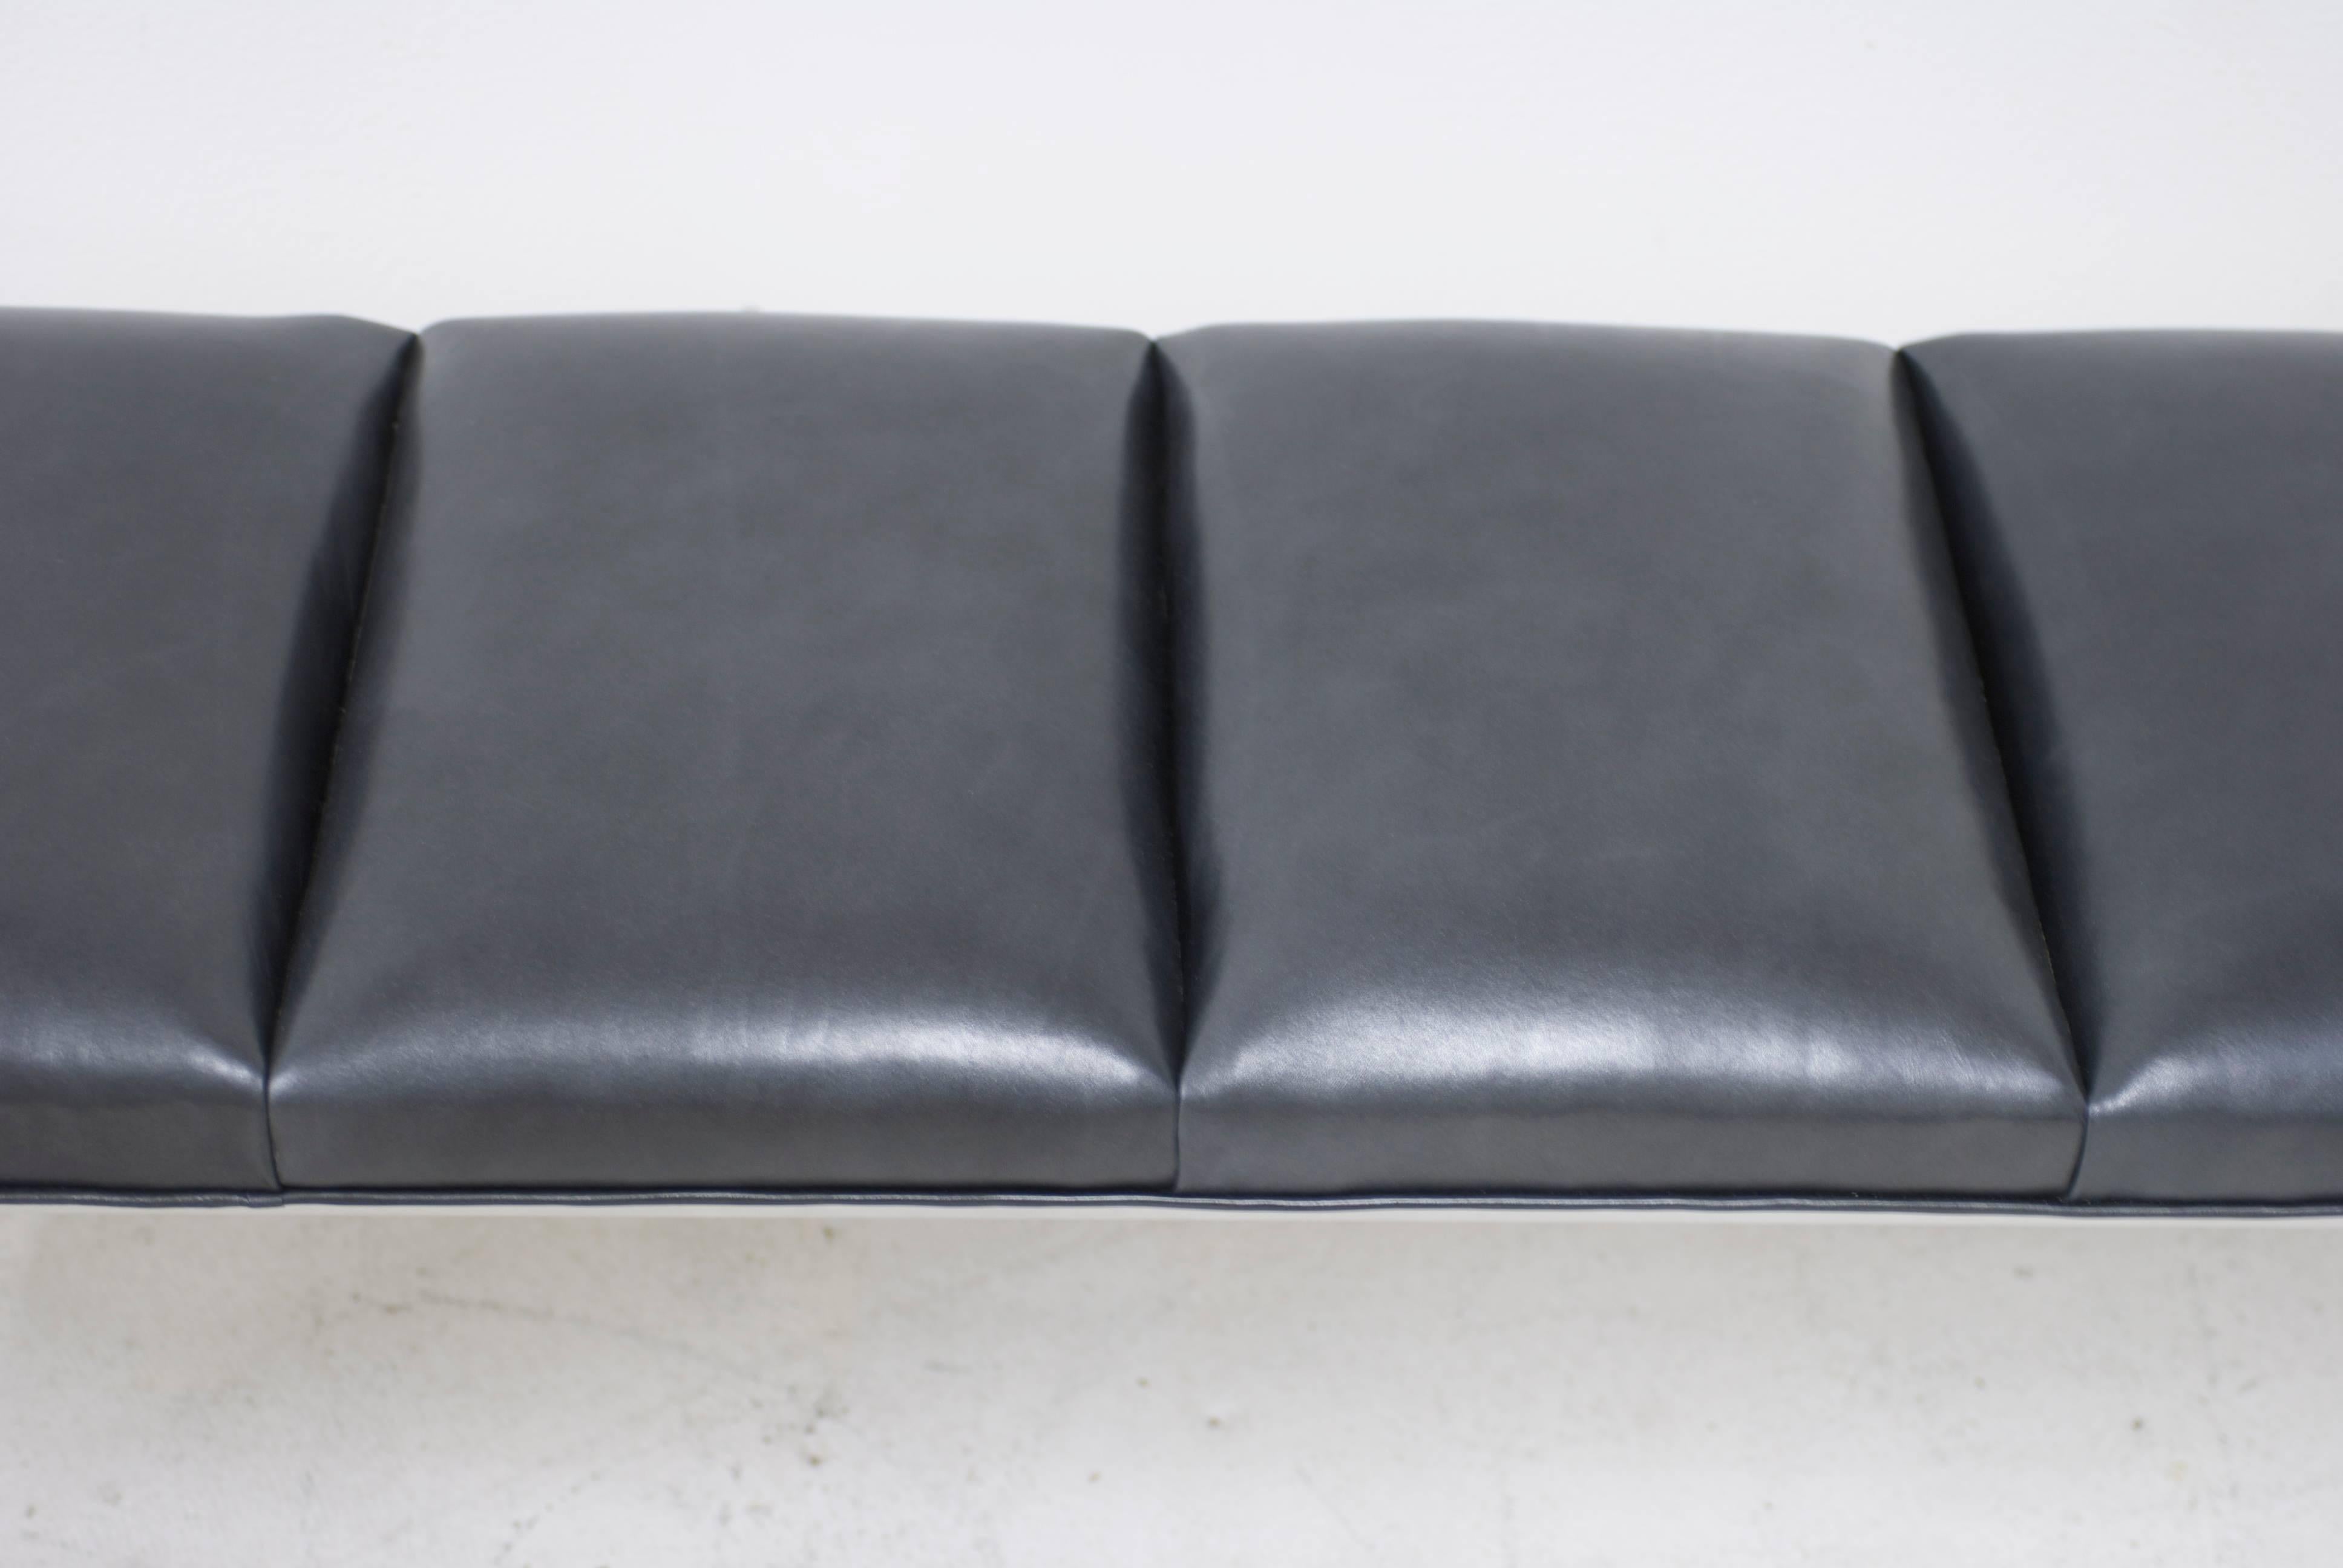  Chanel Tufted Black Leather and Aluminum Bench 3